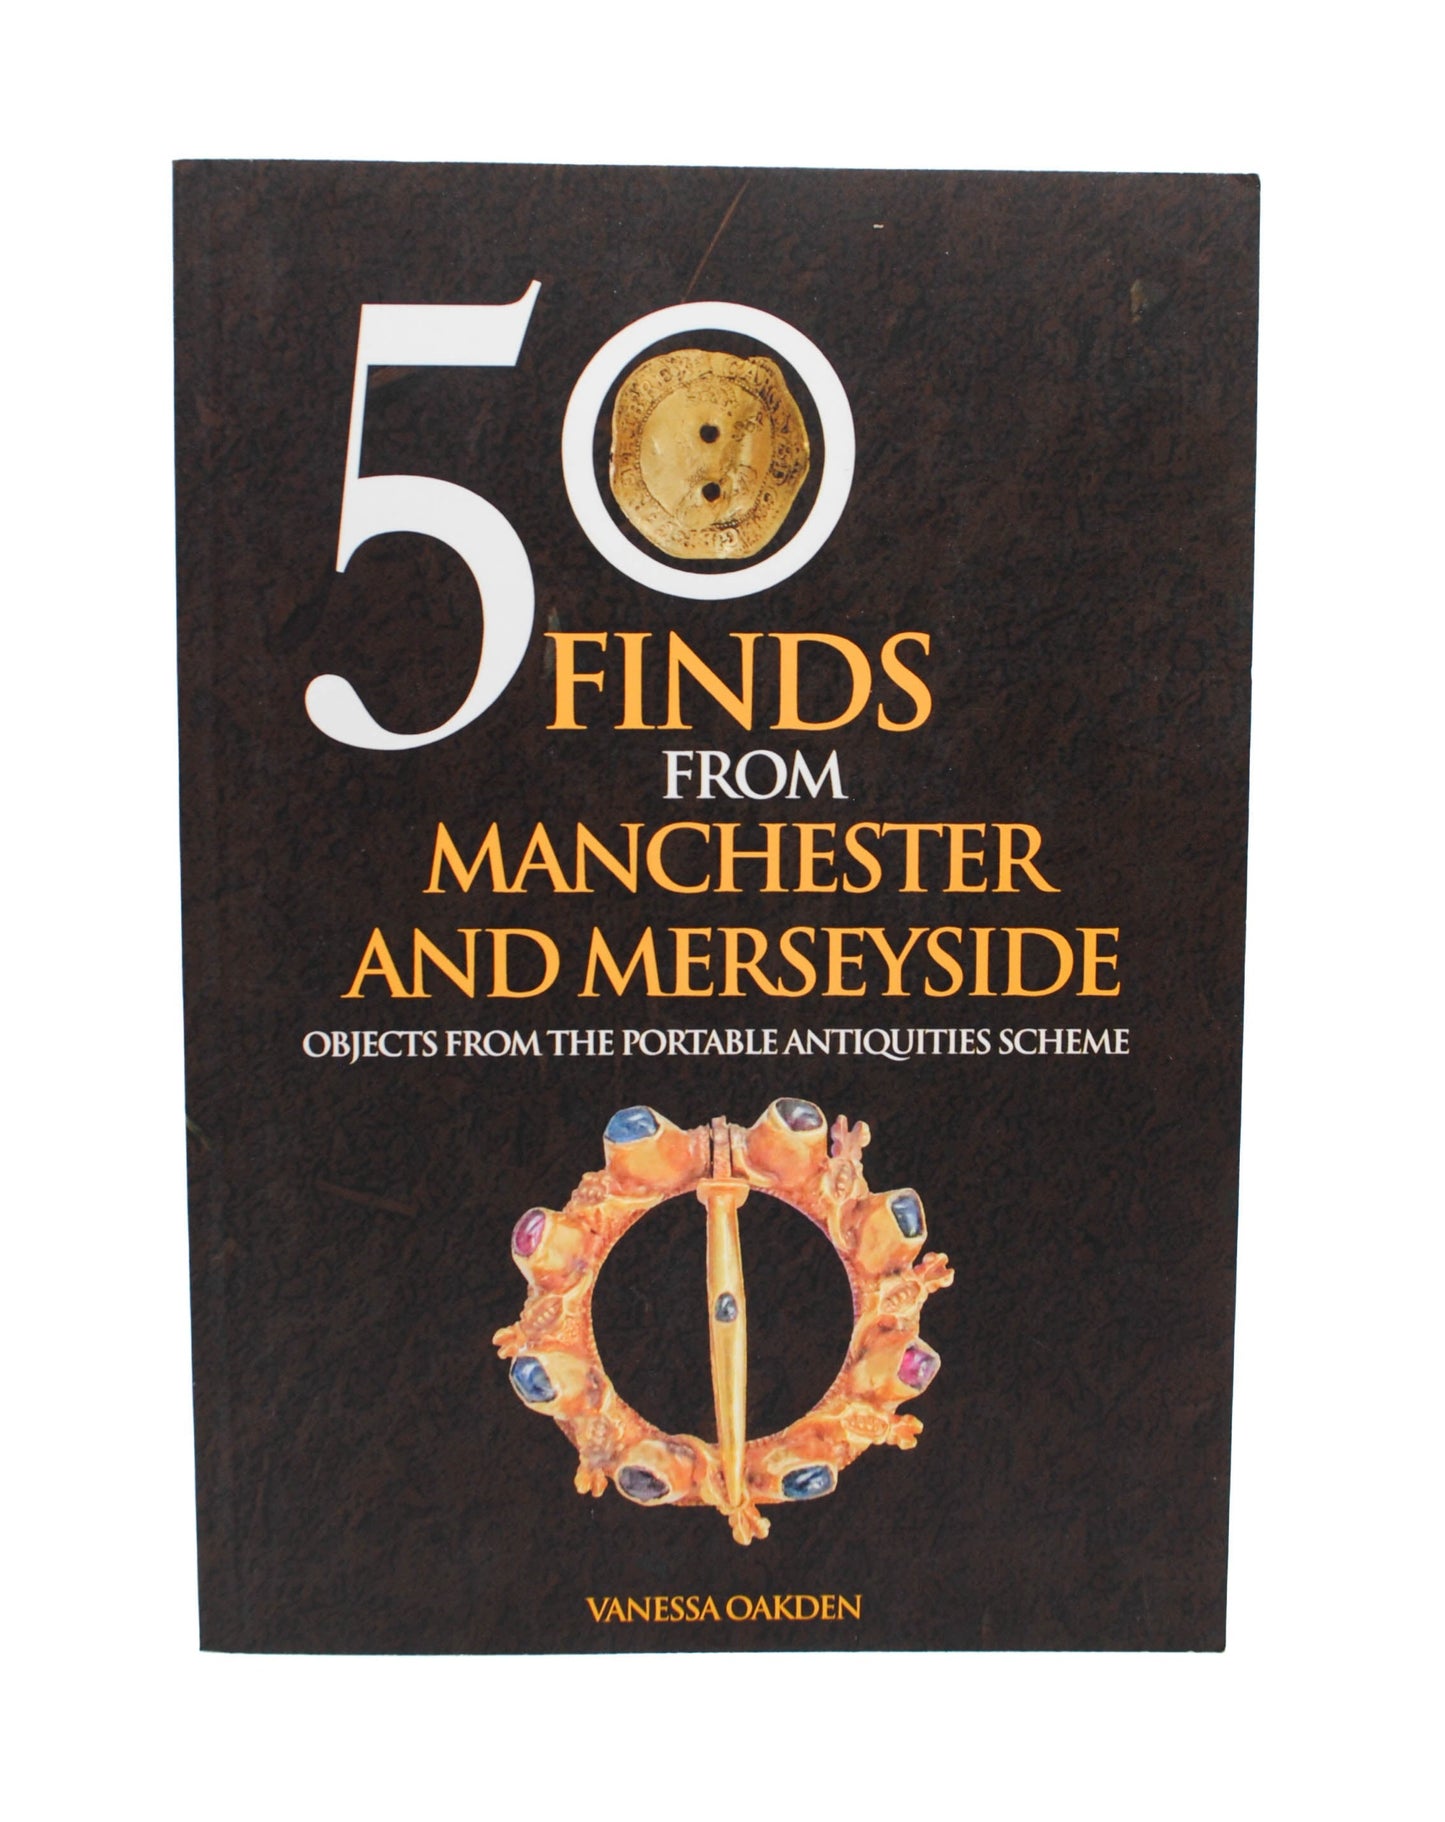 50 Finds From Manchester and Merseyside: Objects from the Portable Antiquities Scheme